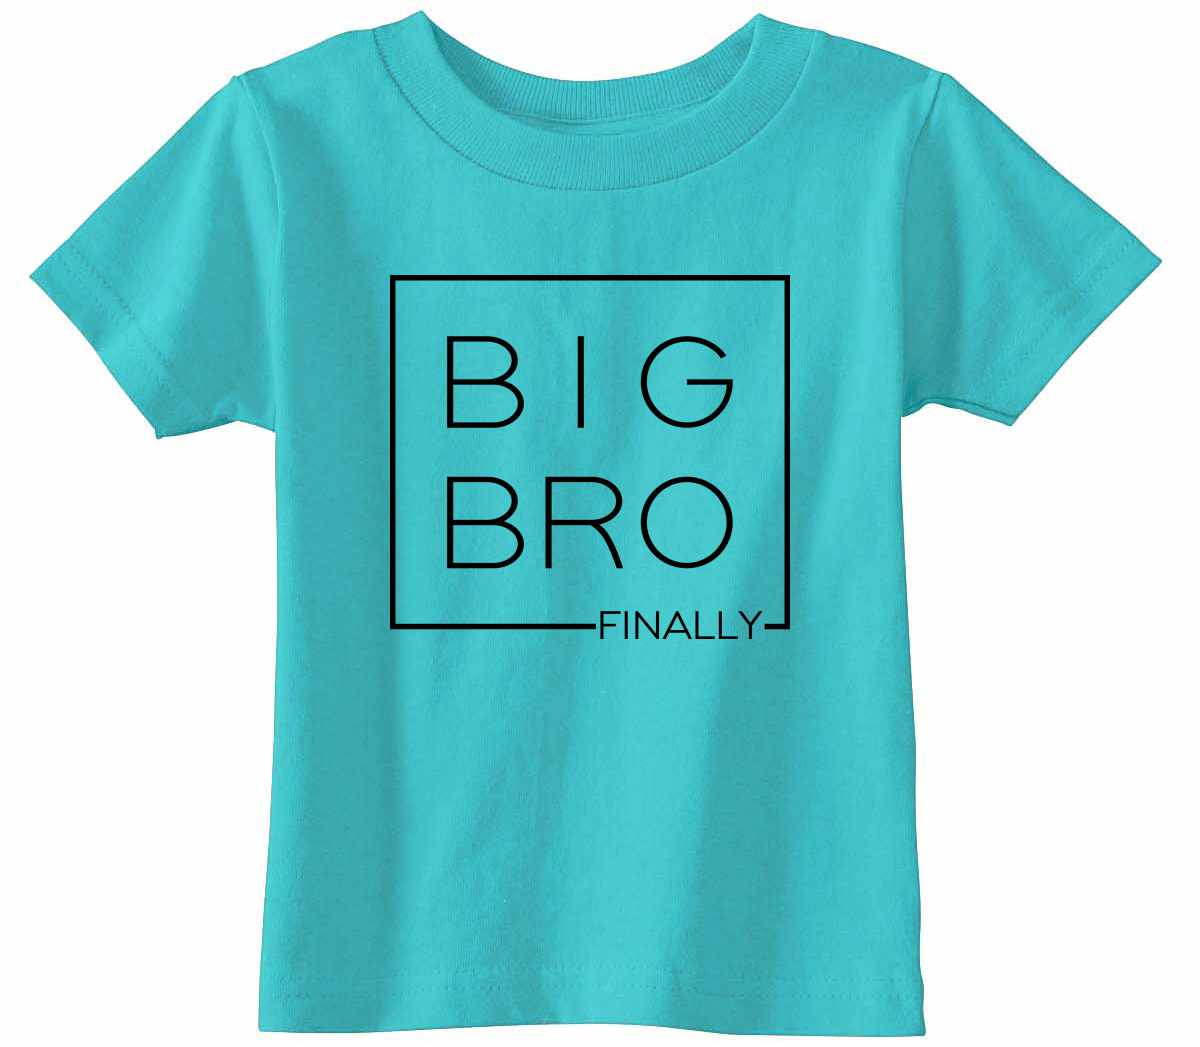 Big Bro Finally- Big Brother Boxed on Infant-Toddler T-Shirt (#1314-7)